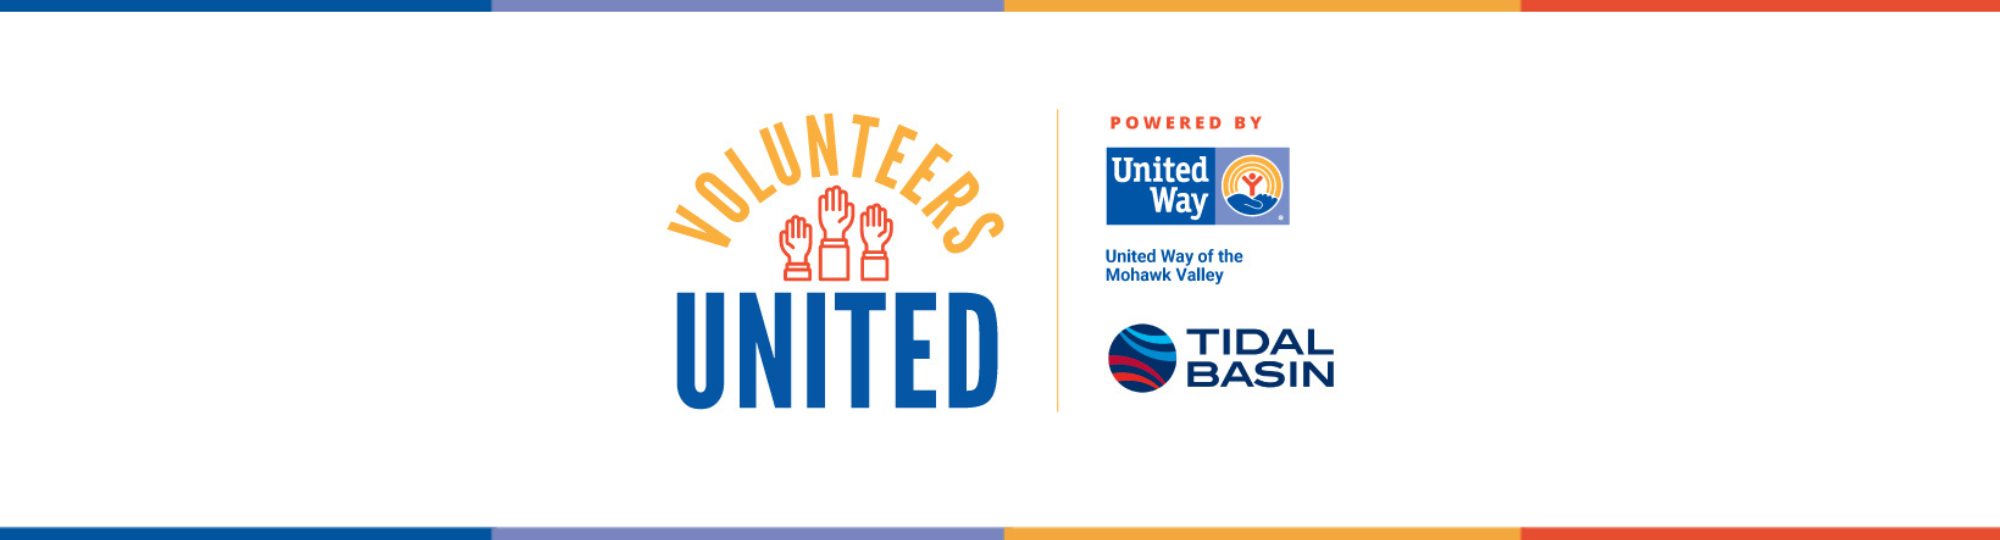 Volunteers United Logo, powered by United Way of the Mohawk Valley and Tidal Basin